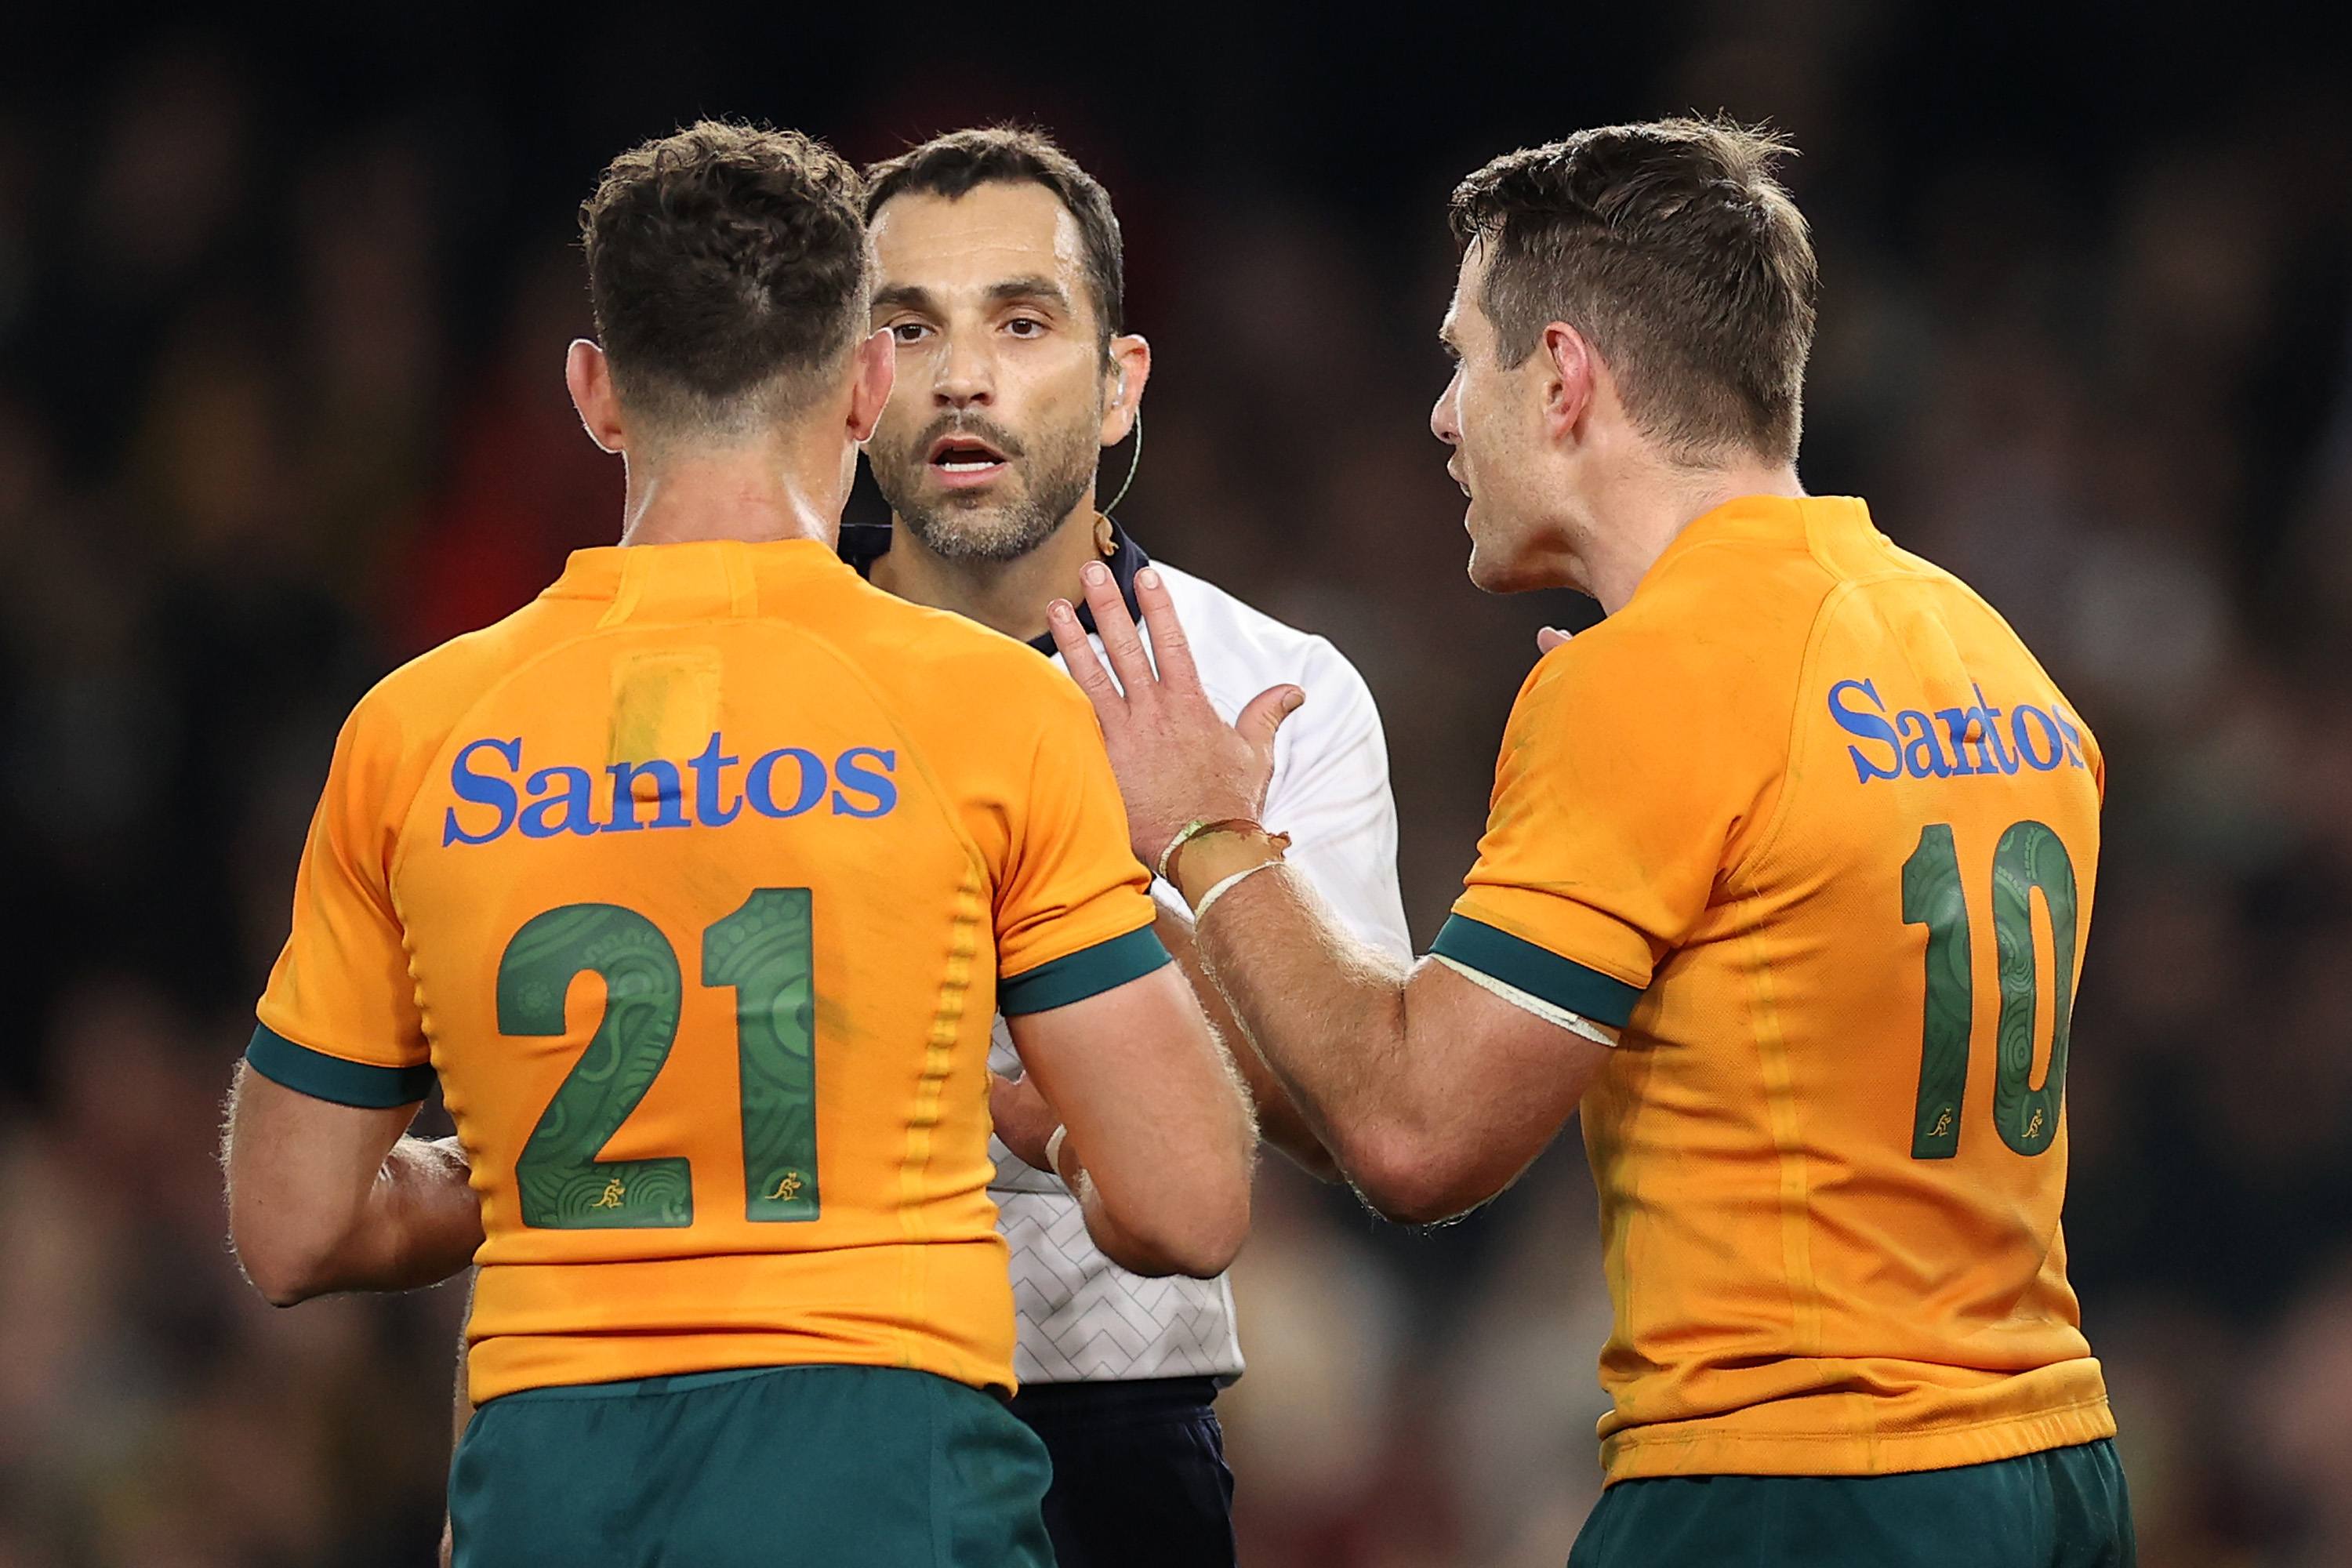 Wallabies denied Bledisloe Cup Test win over All Blacks after controversial refereeing decision in 39-37 loss